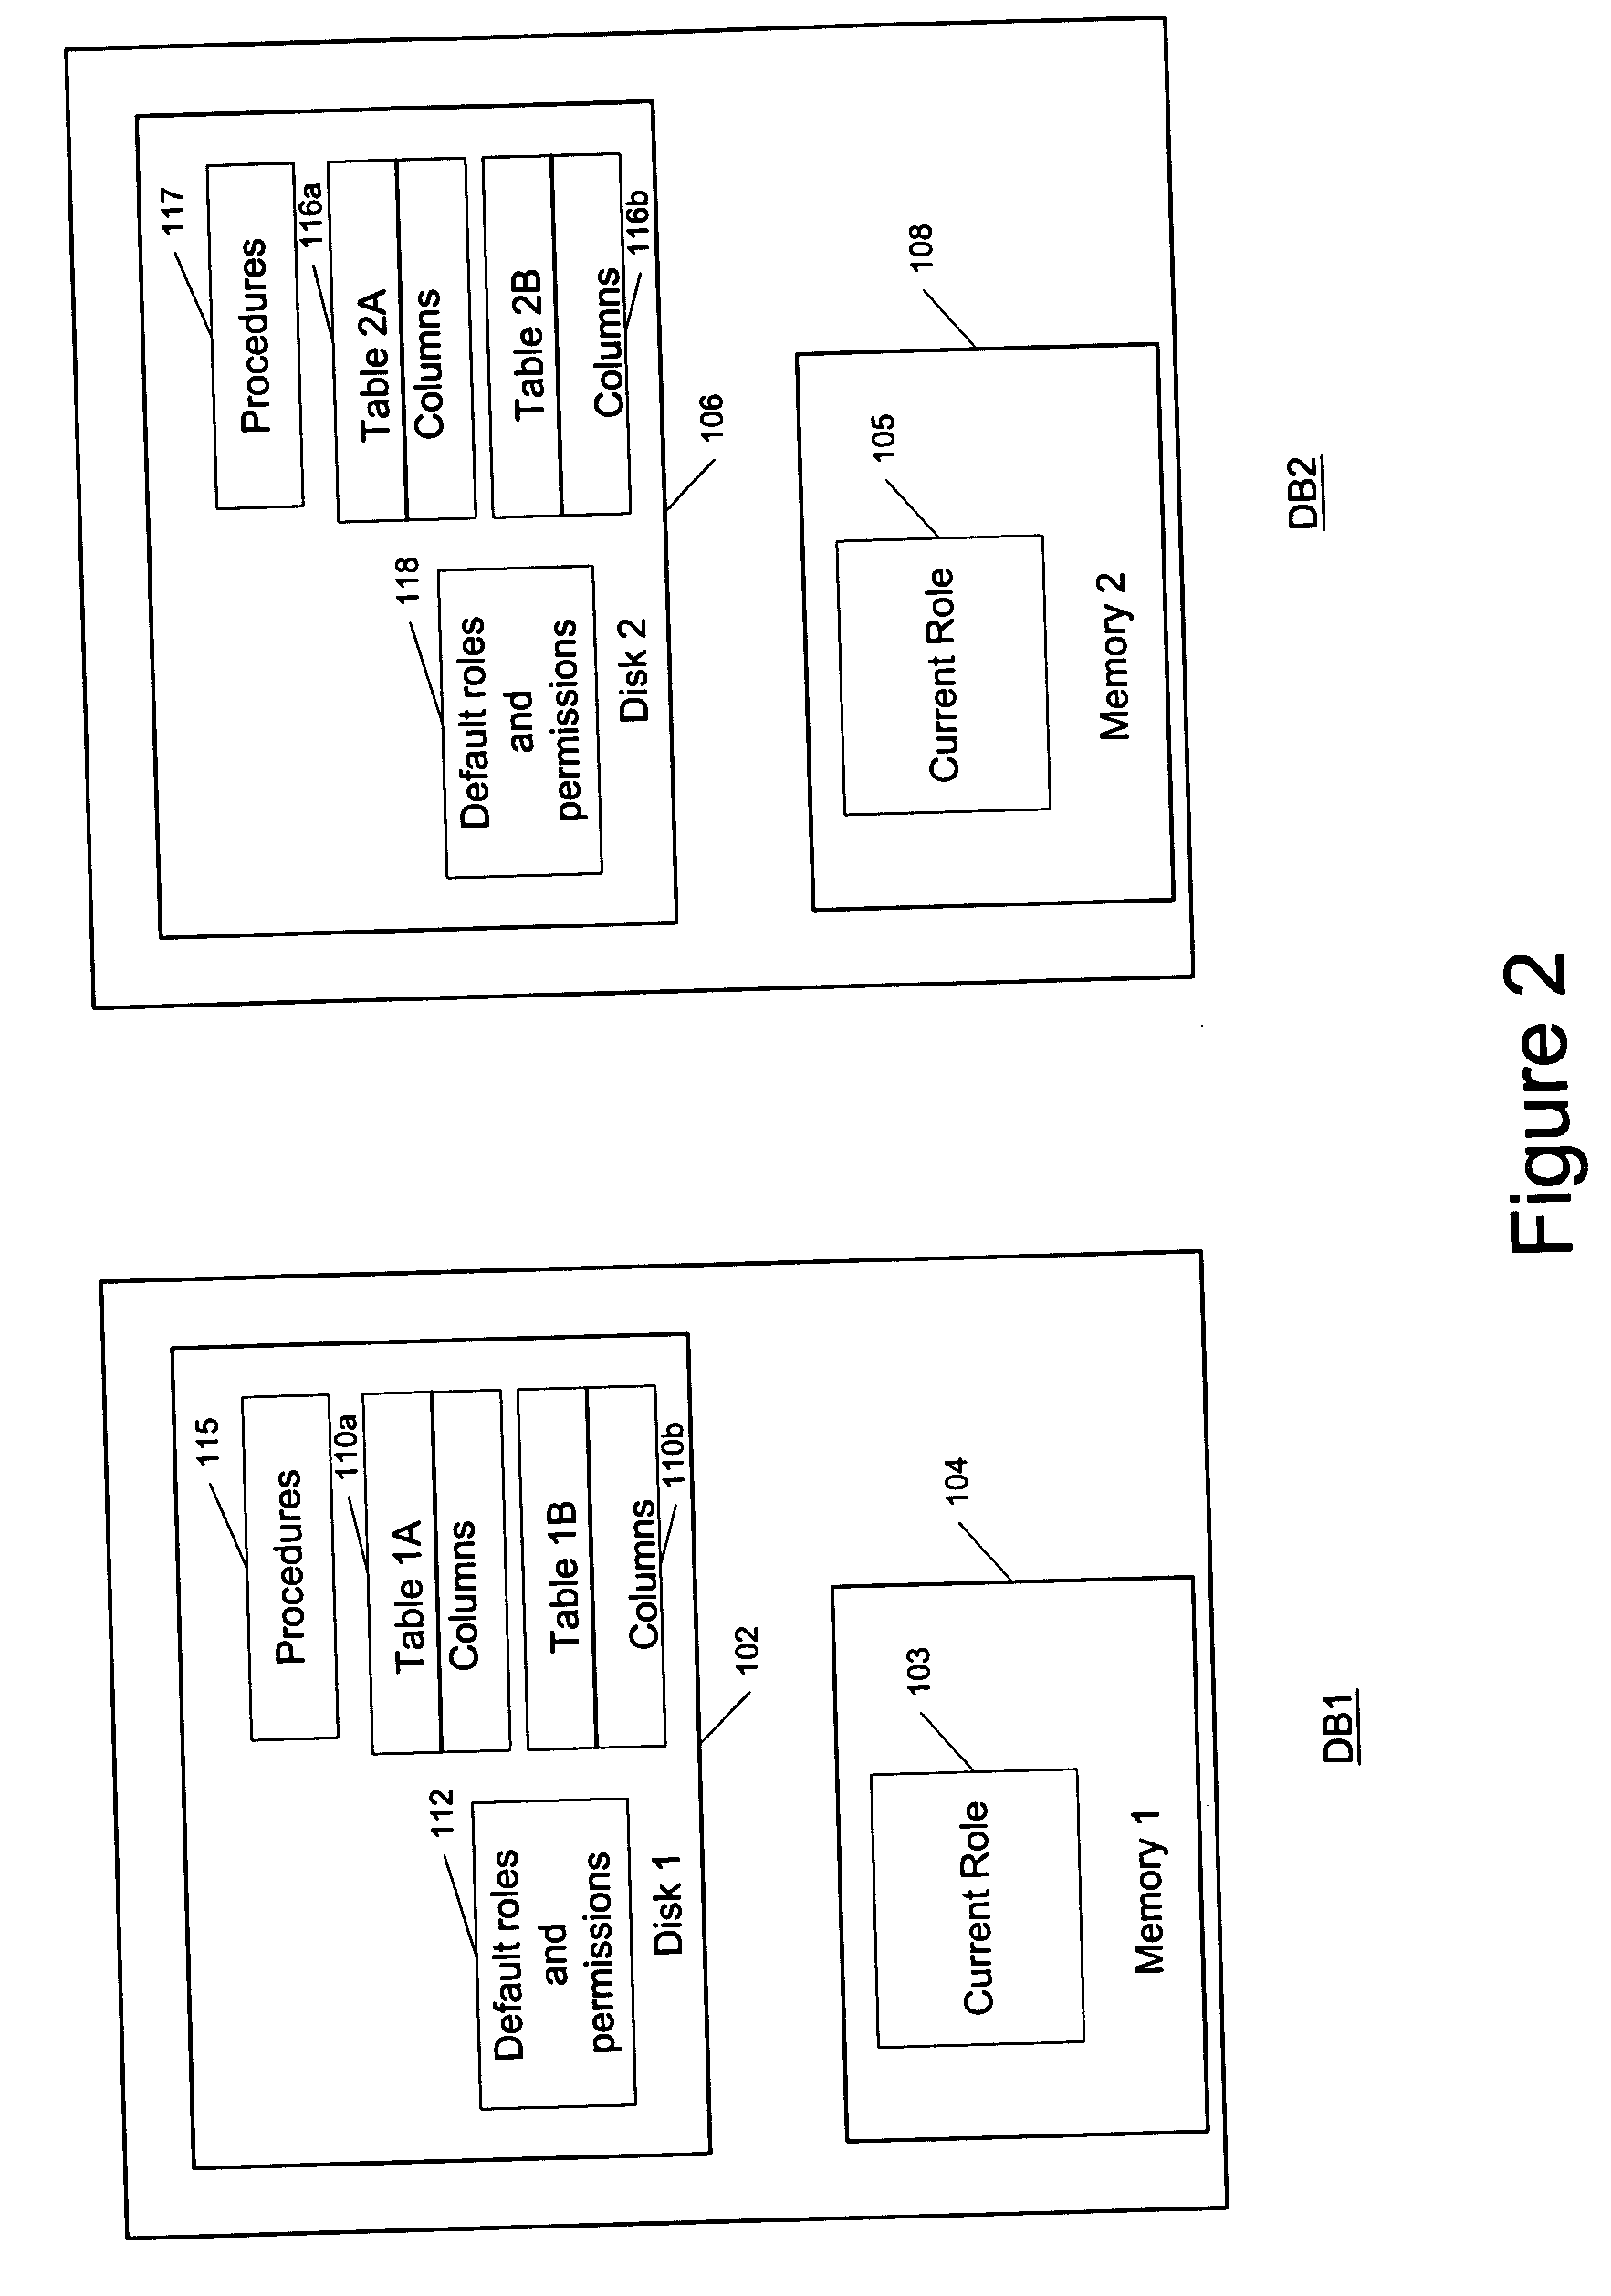 Method and system for providing a default role for a user in a remote database